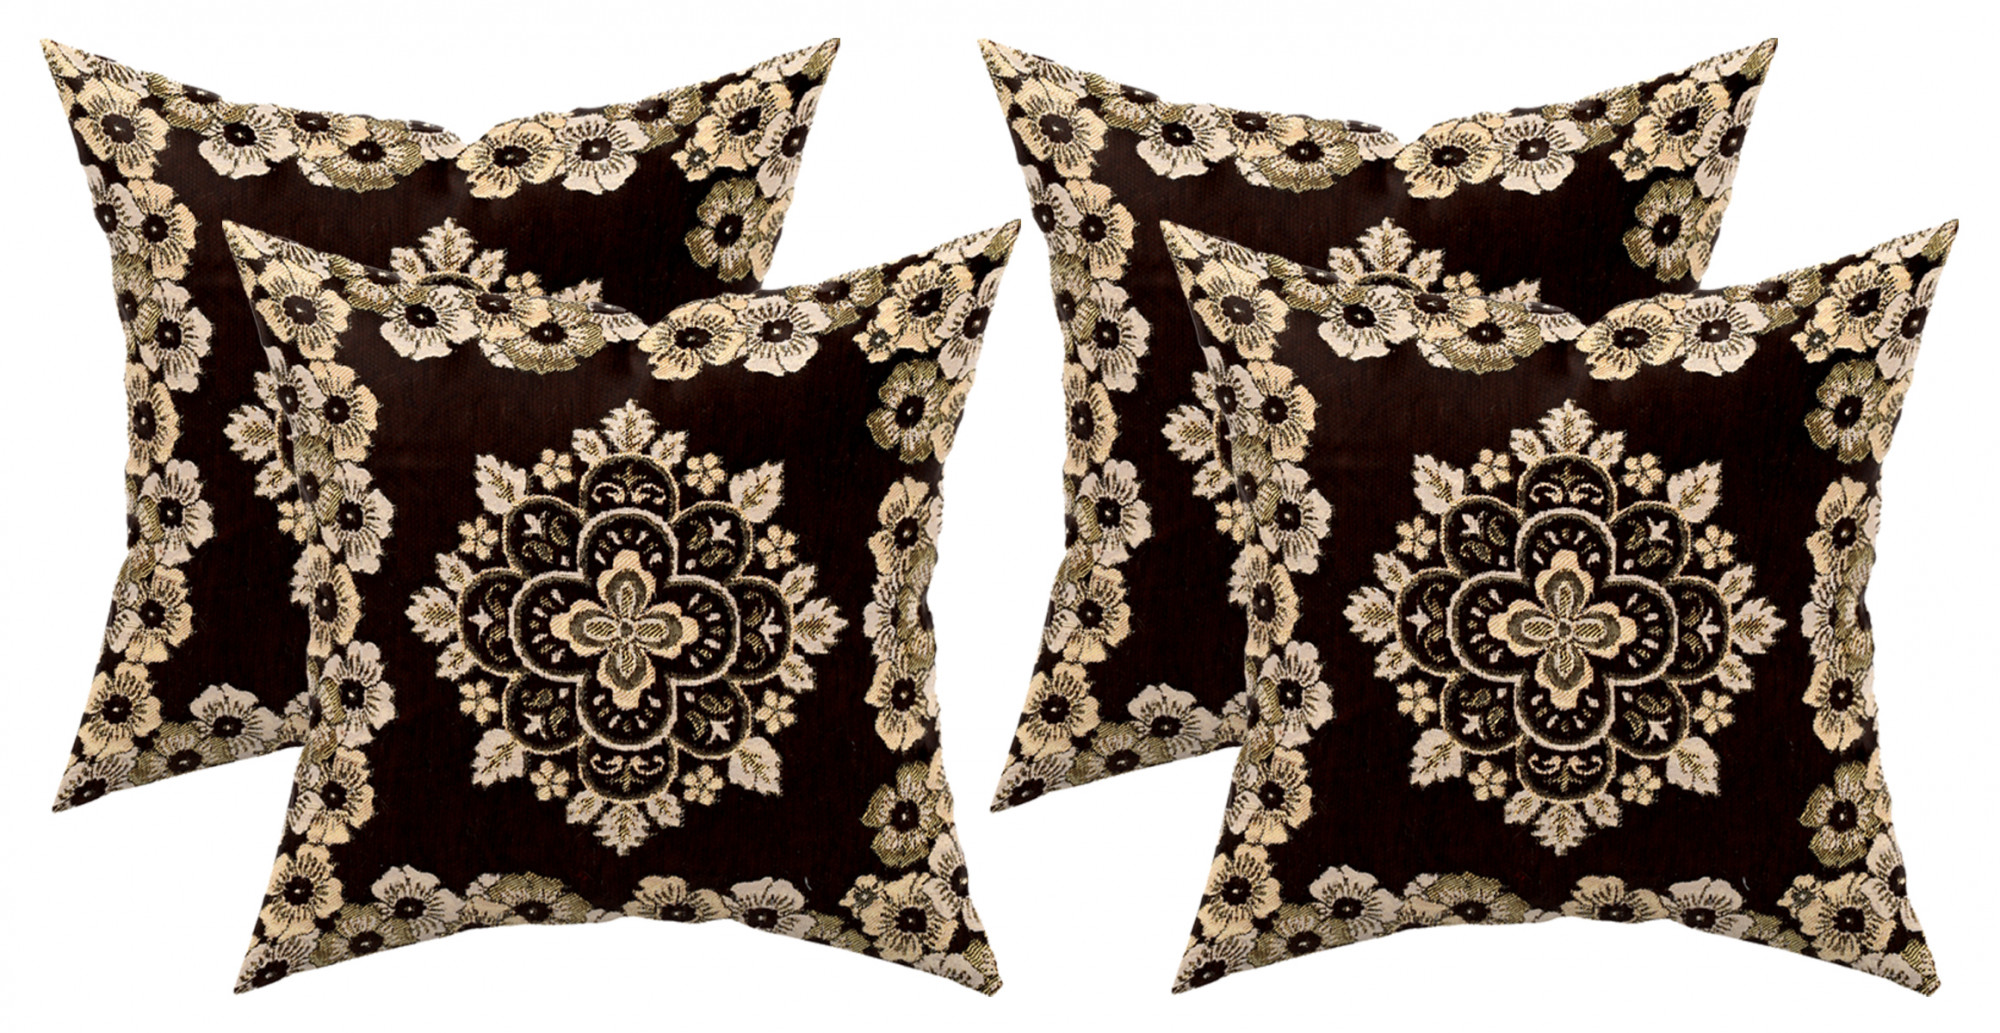 Kuber Industries Velvet Flower Design Soft Decorative Square Throw Pillow Cover, Cushion Covers, Pillow Case For Sofa Couch Bed Chair 16x16 Inch-(Brown)